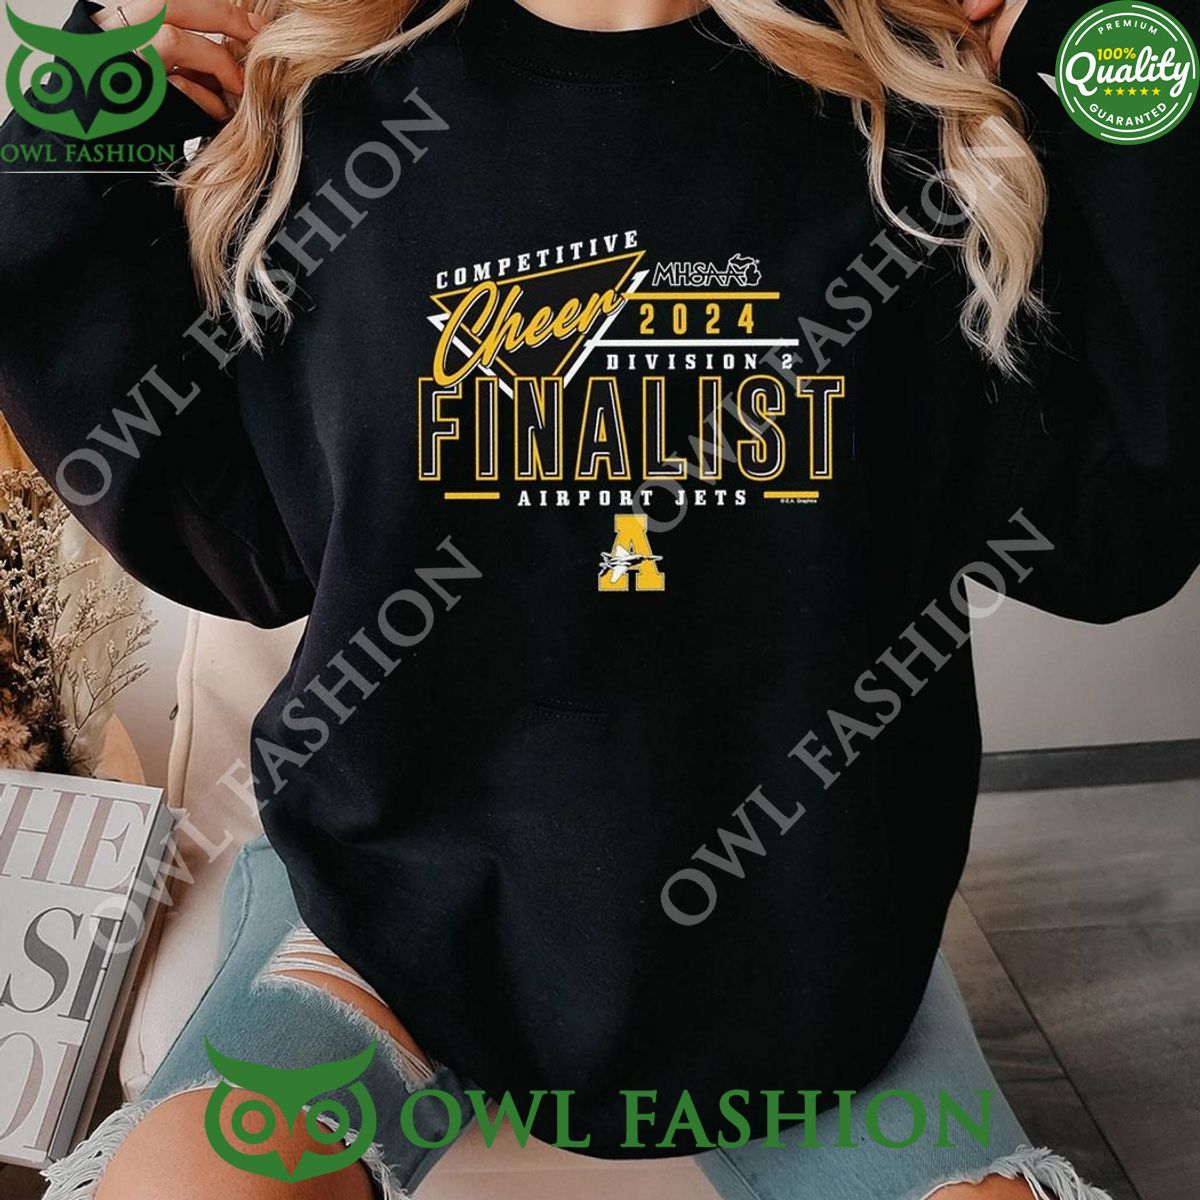 Mhsaa Competitive Cheer 2024 Division 2 Finalist Airport Jets Hoodie Shirt